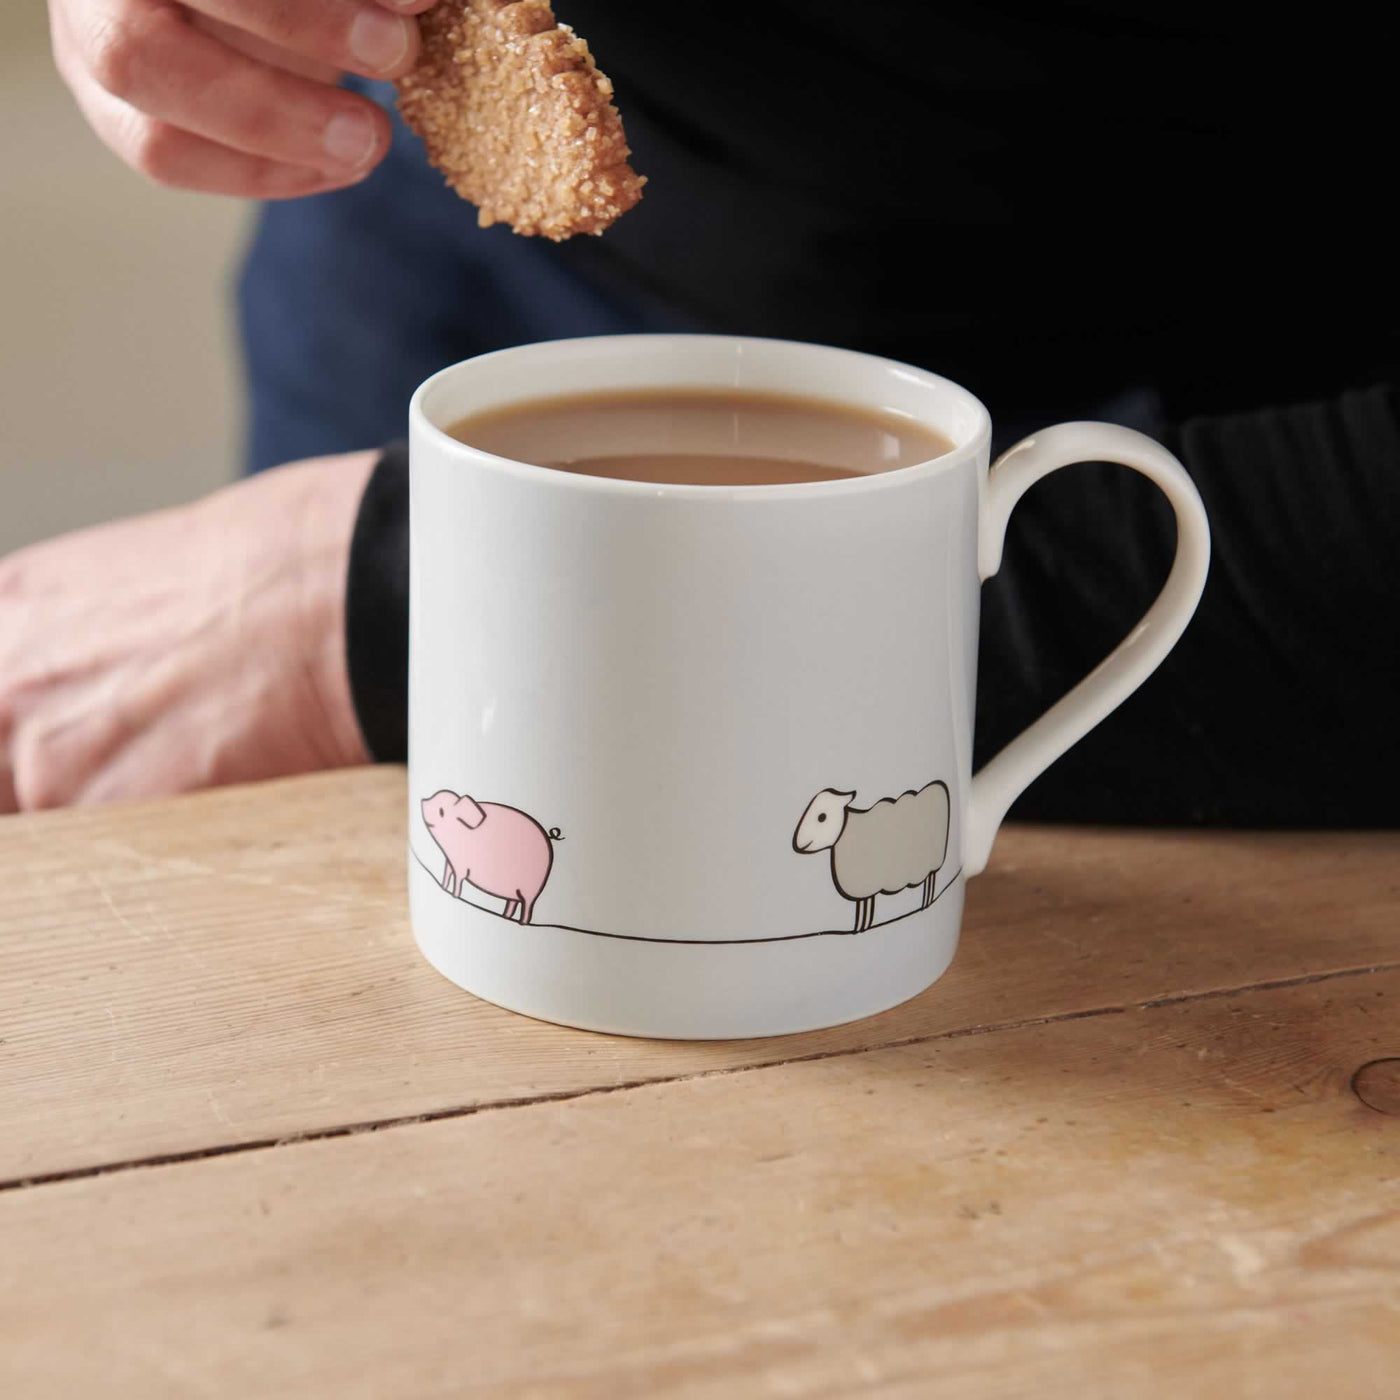 Farm Collection Mug with biscuit